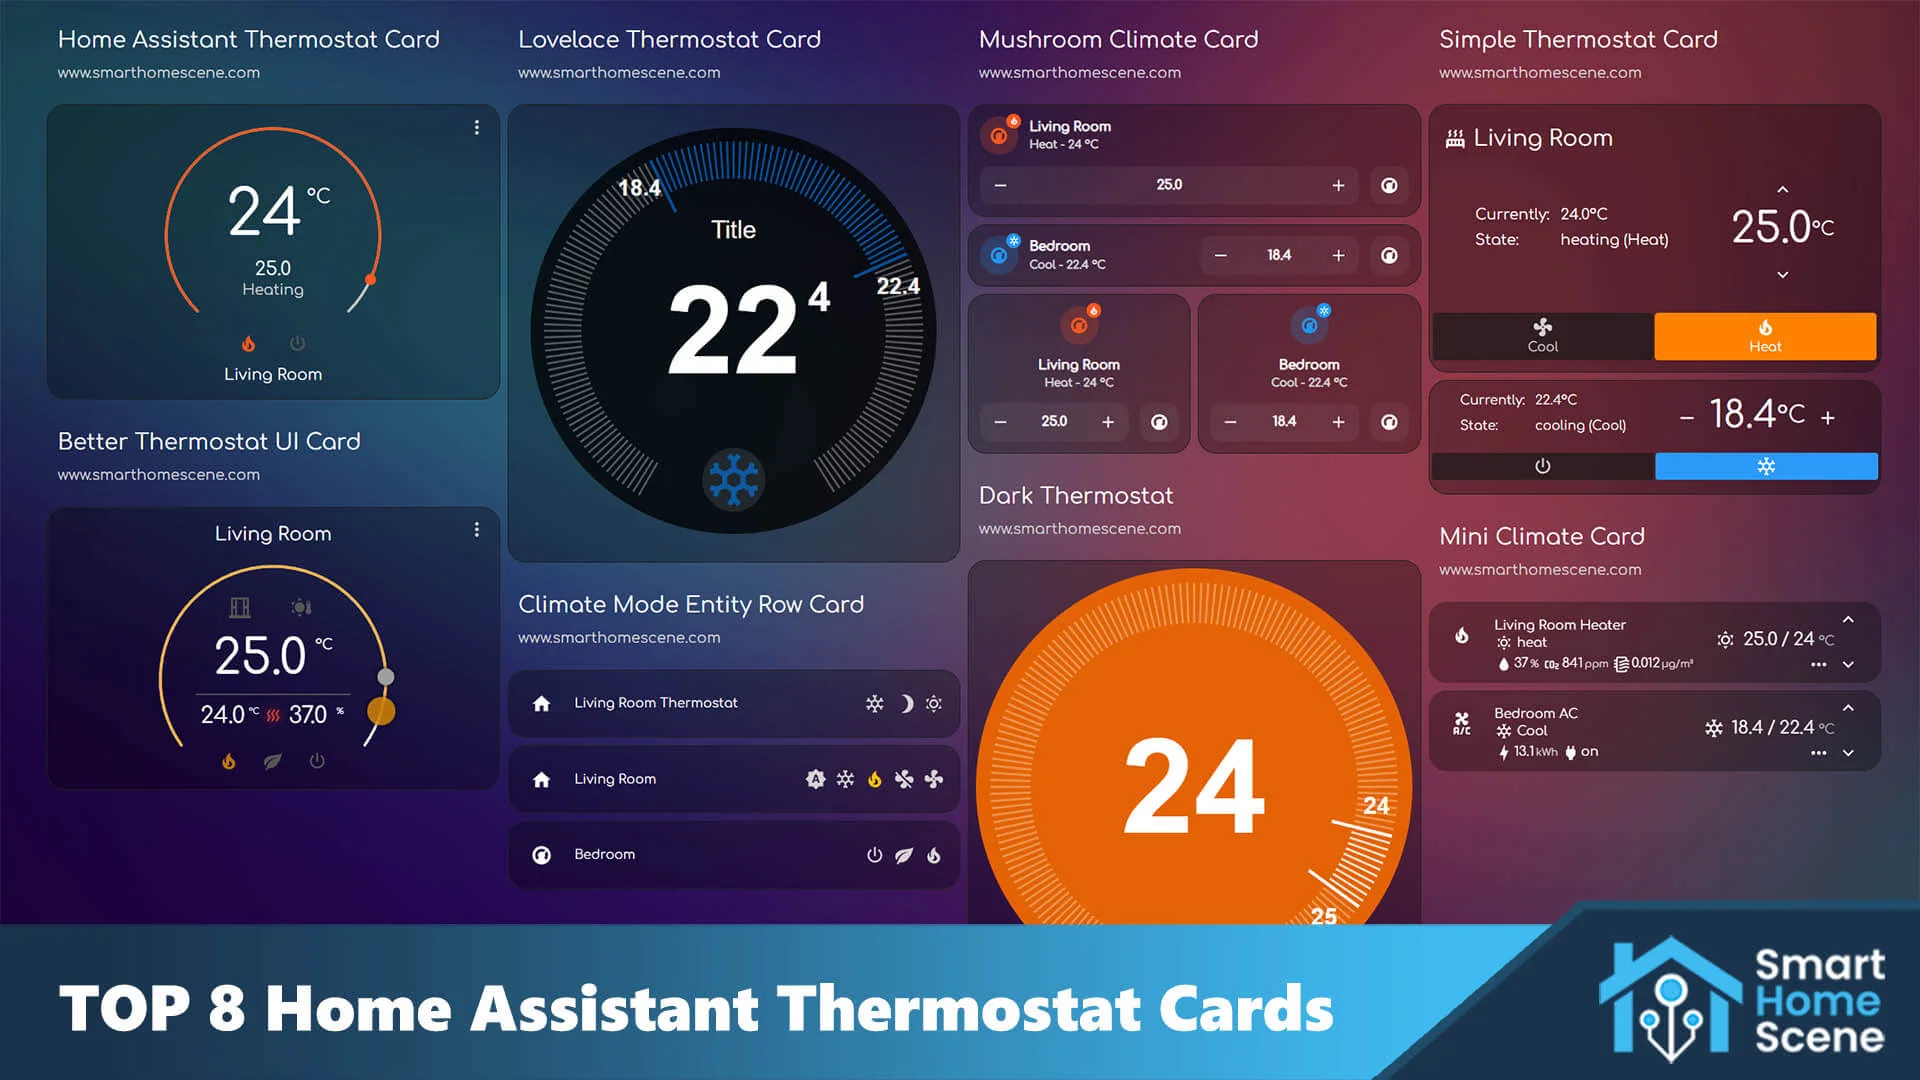 https://smarthomescene.com/wp-content/uploads/2023/02/top-8-home-assistant-thermostat-cards-featured.jpg.webp